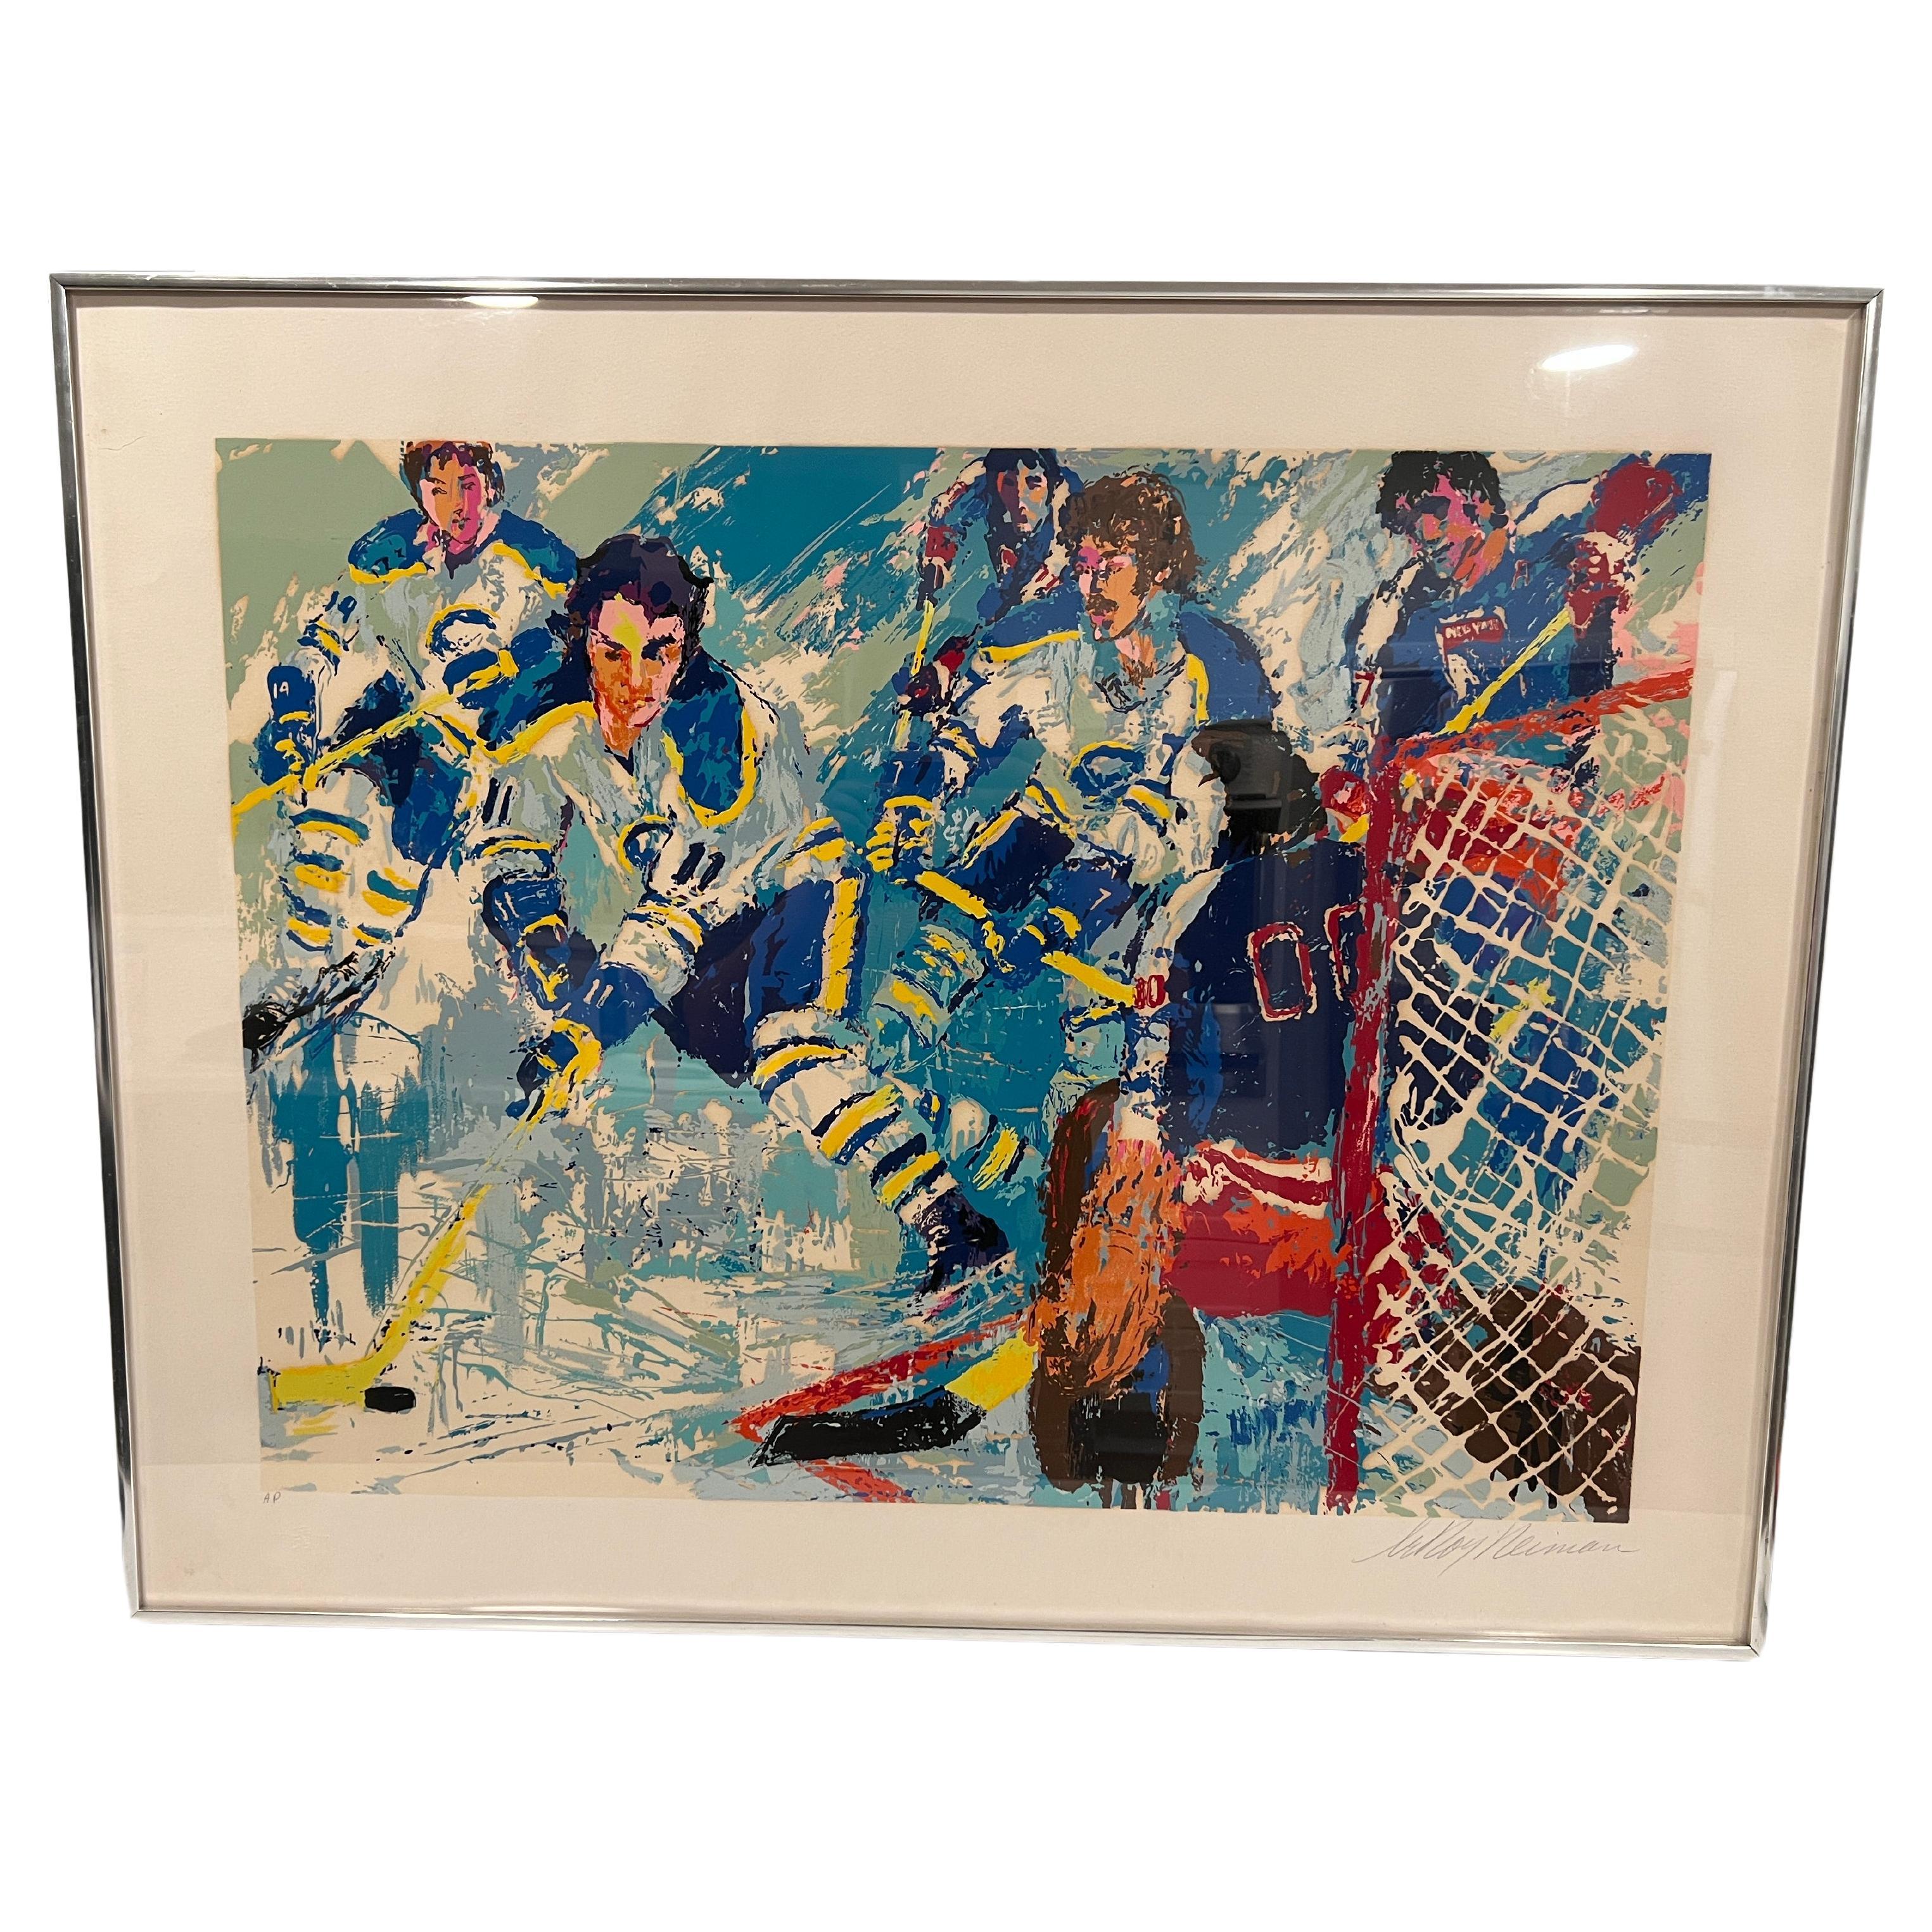 LeRoy Neiman "French Connection" Artist Proof Hockey Serigraph C. 1977